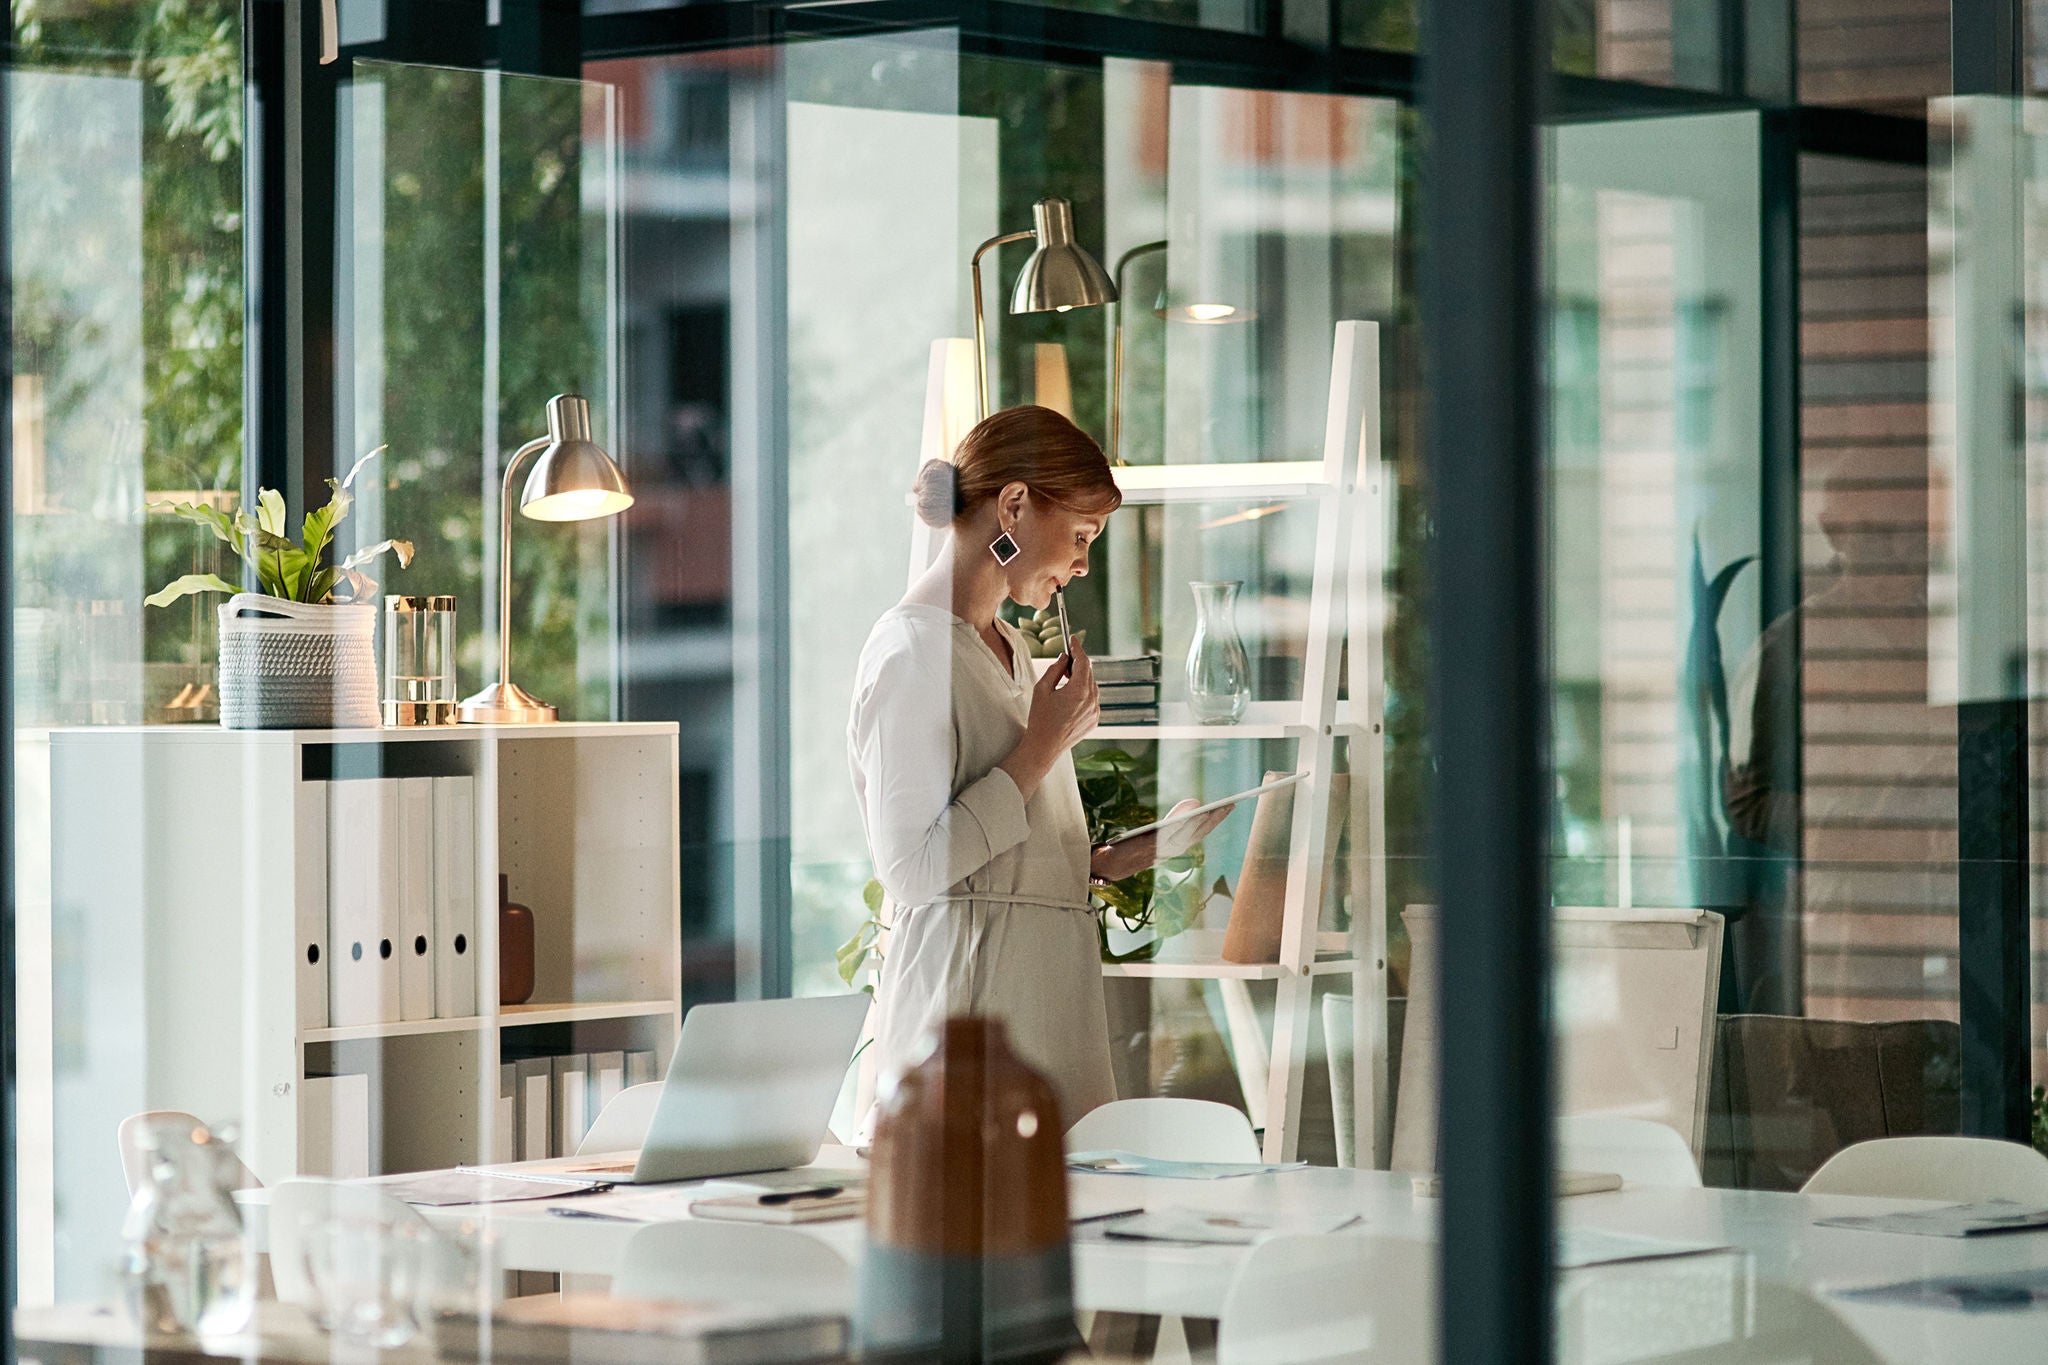 A modern office, building interior and a businesswoman doing online research on a tablet or looking at files. Female inside her corporate workplace architecture indoors preparing for a presentation